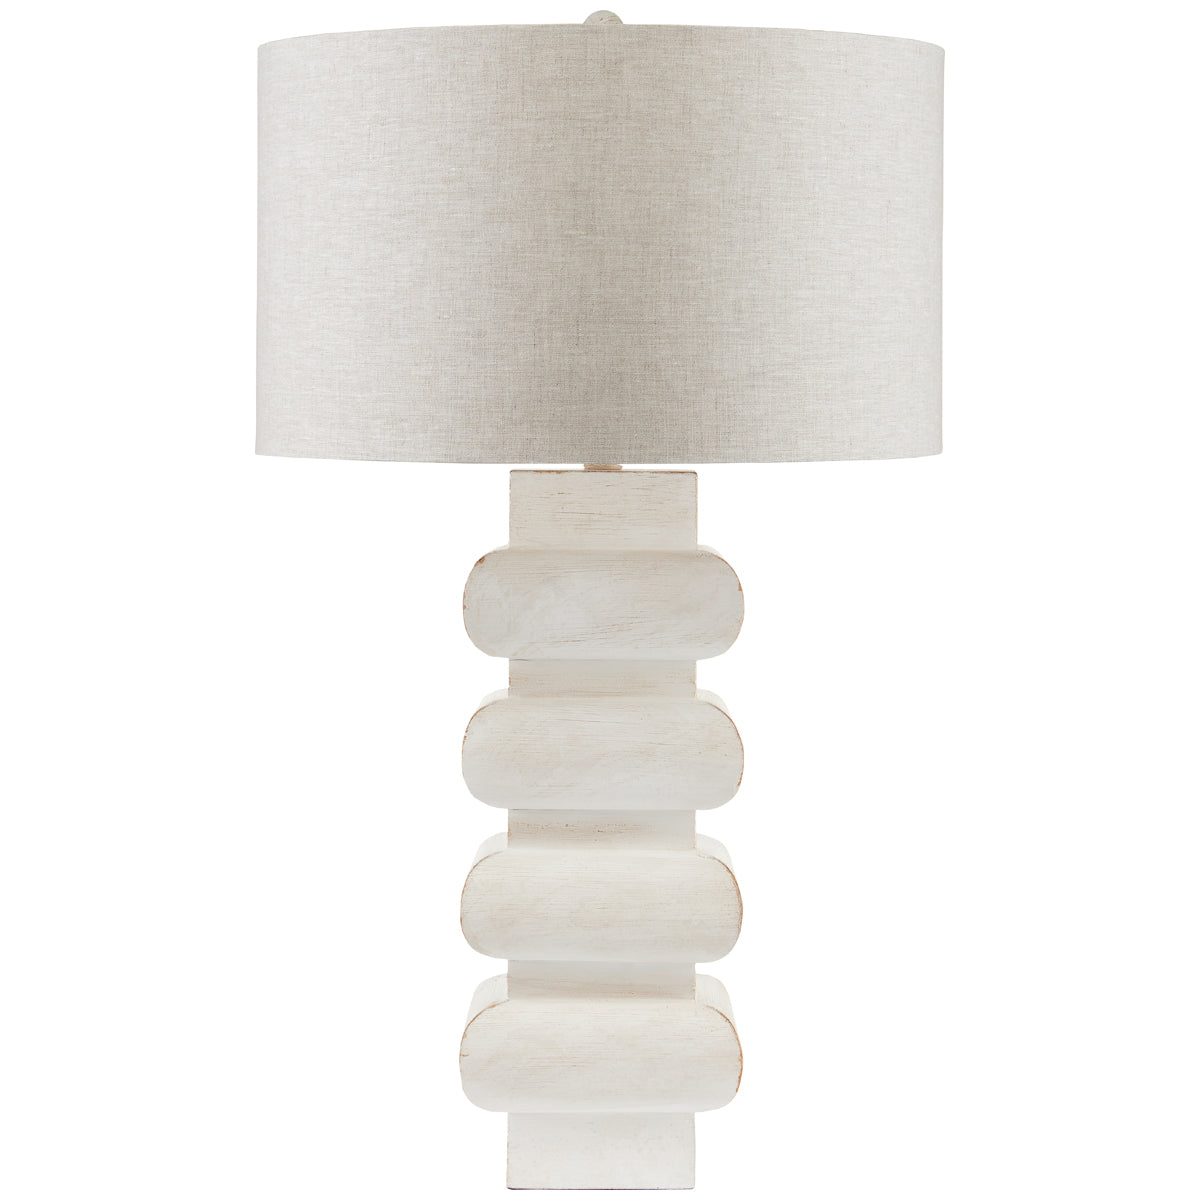 Currey and Company Blondel Table Lamp